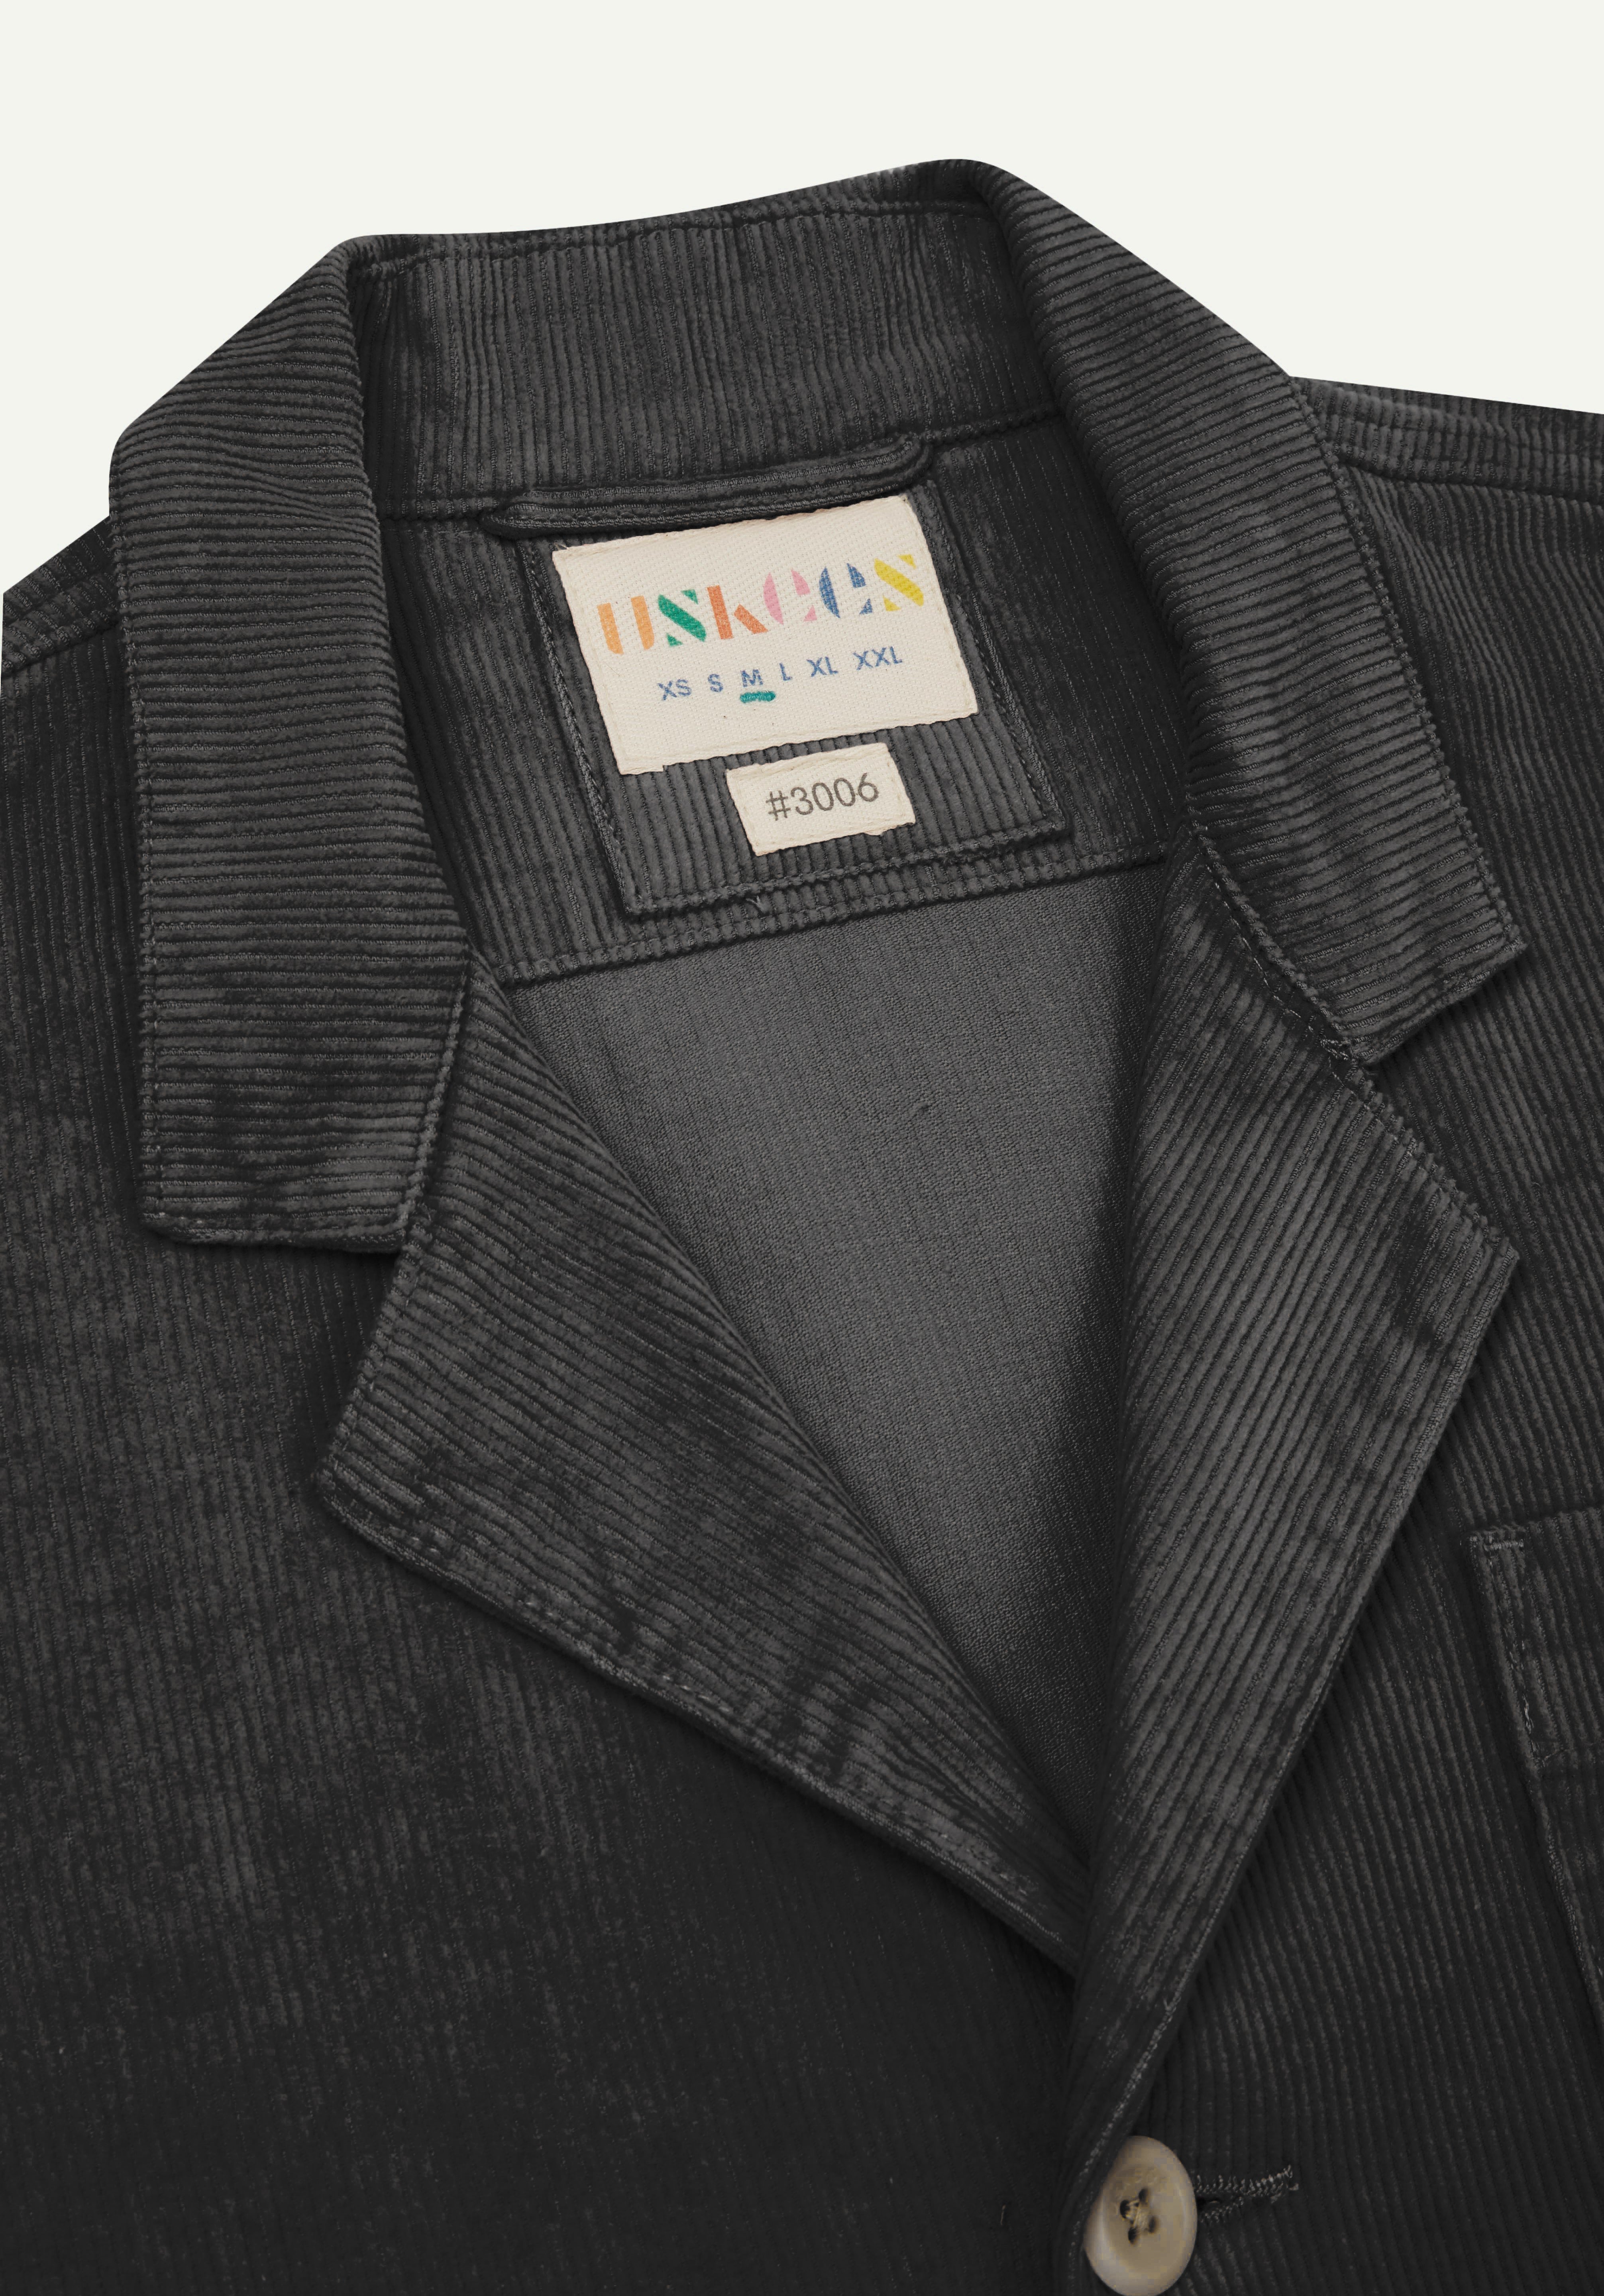 Flat front close view of dark grey #3006 corduroy blazer with view of collar, brand/size label and Uskees branding label.